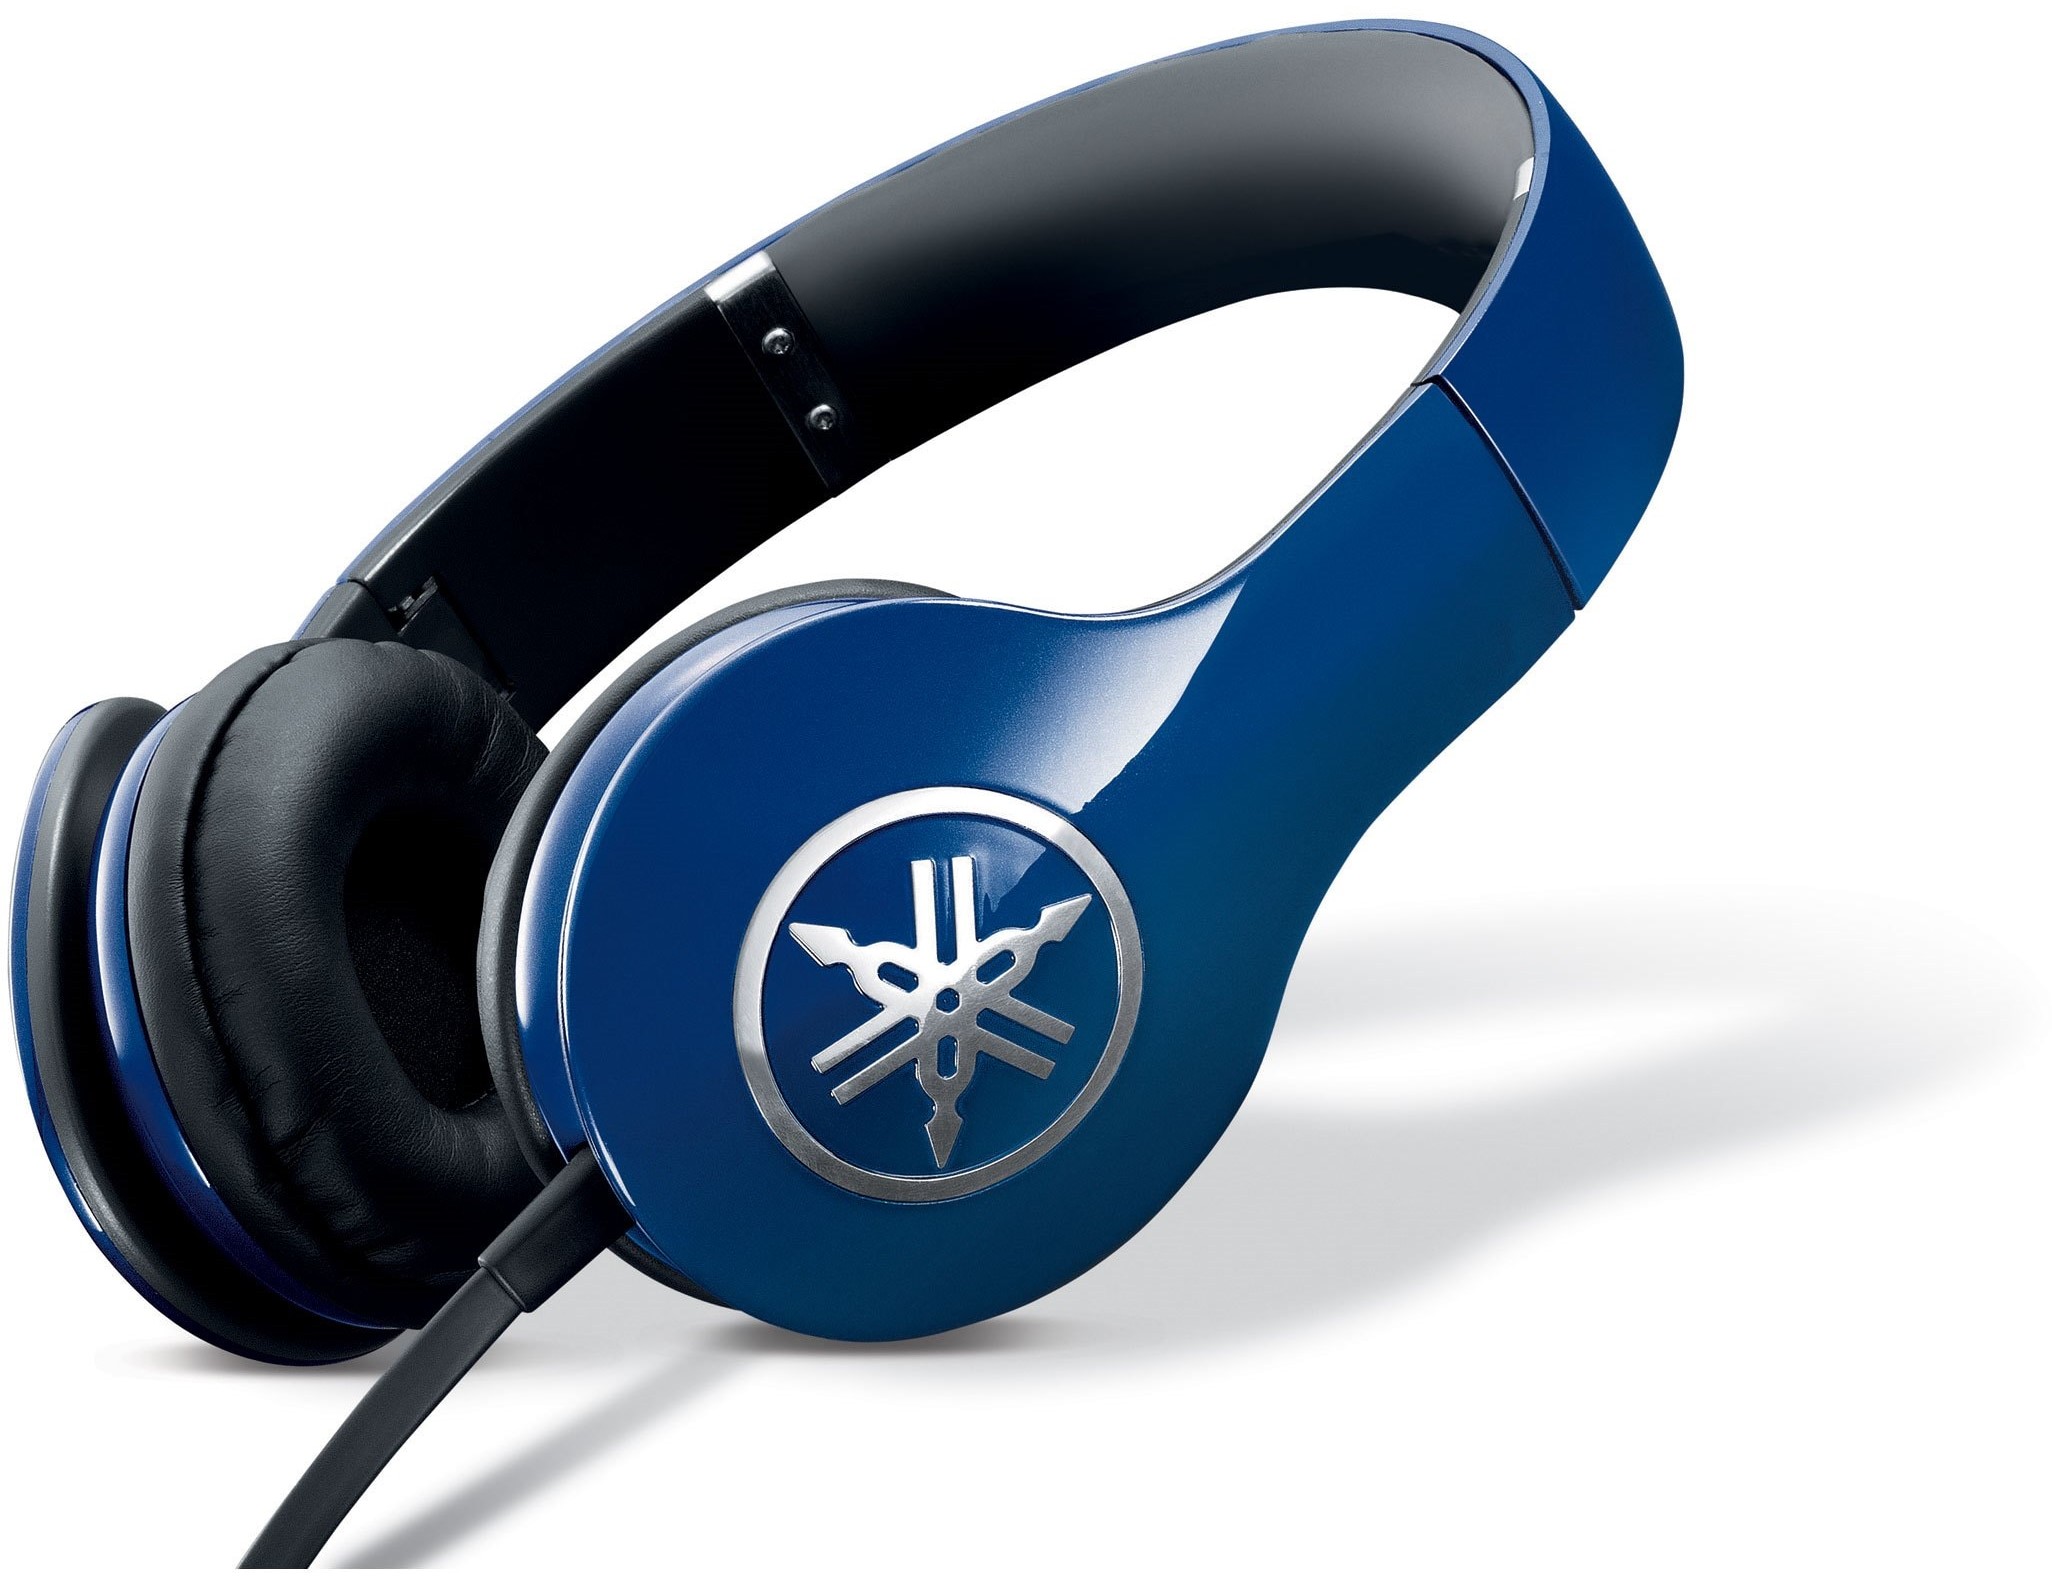 Blue over the head headphones with Yamaha logo visible.